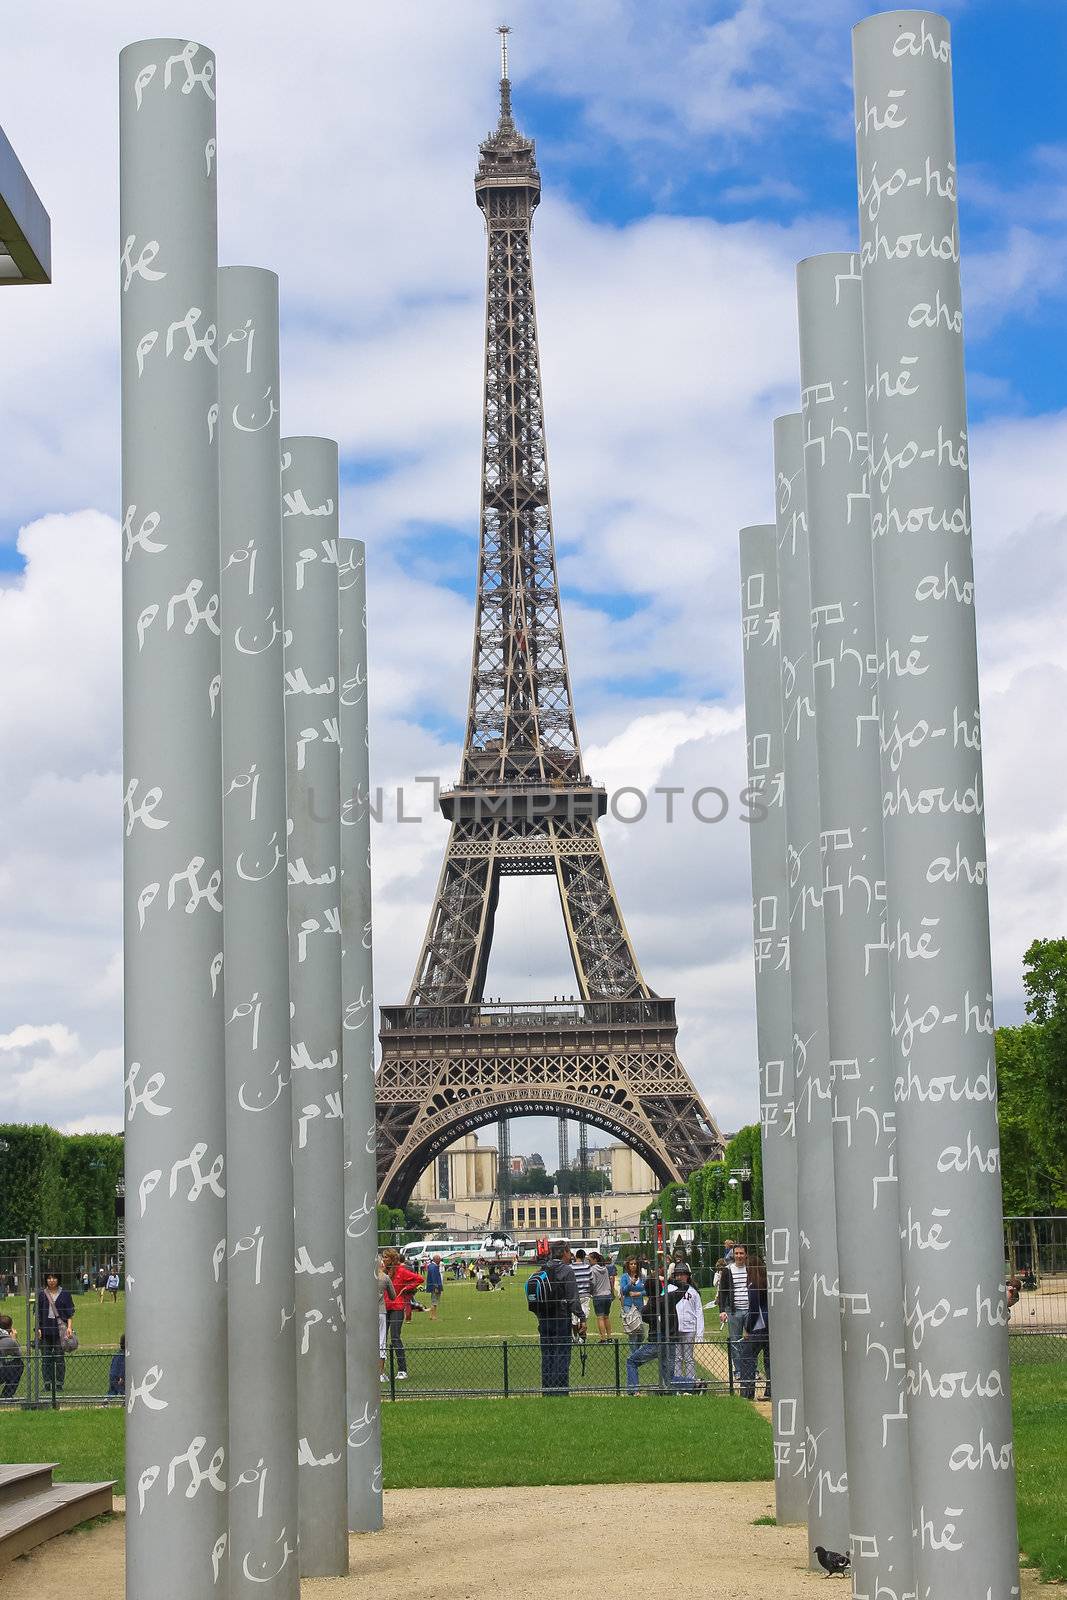 PARIS, FRANCE - JULY 10: Parisians and tourists on lawn Champs de Mars in Paris on July 10, 2012. France
Champ de Mars and the Eiffel Tower, one of the most visited places in Paris